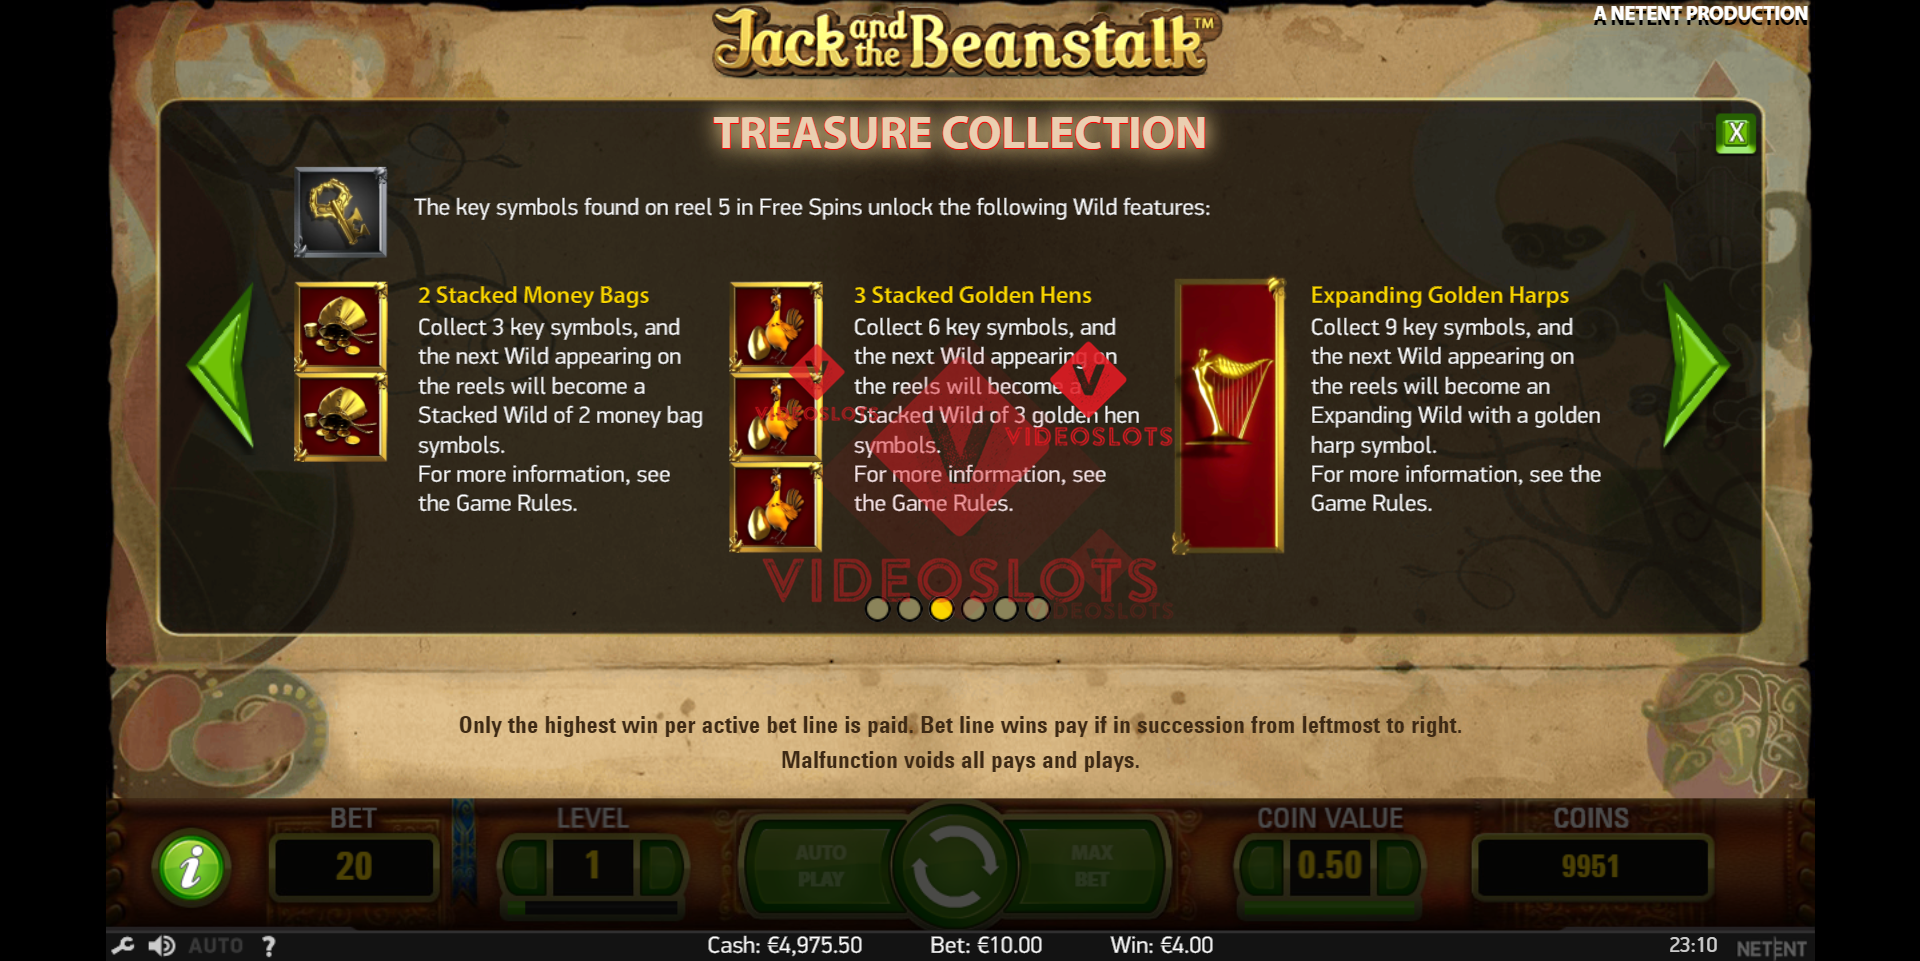 Pay Table for Jack and the Beanstalk slot from NetEnt